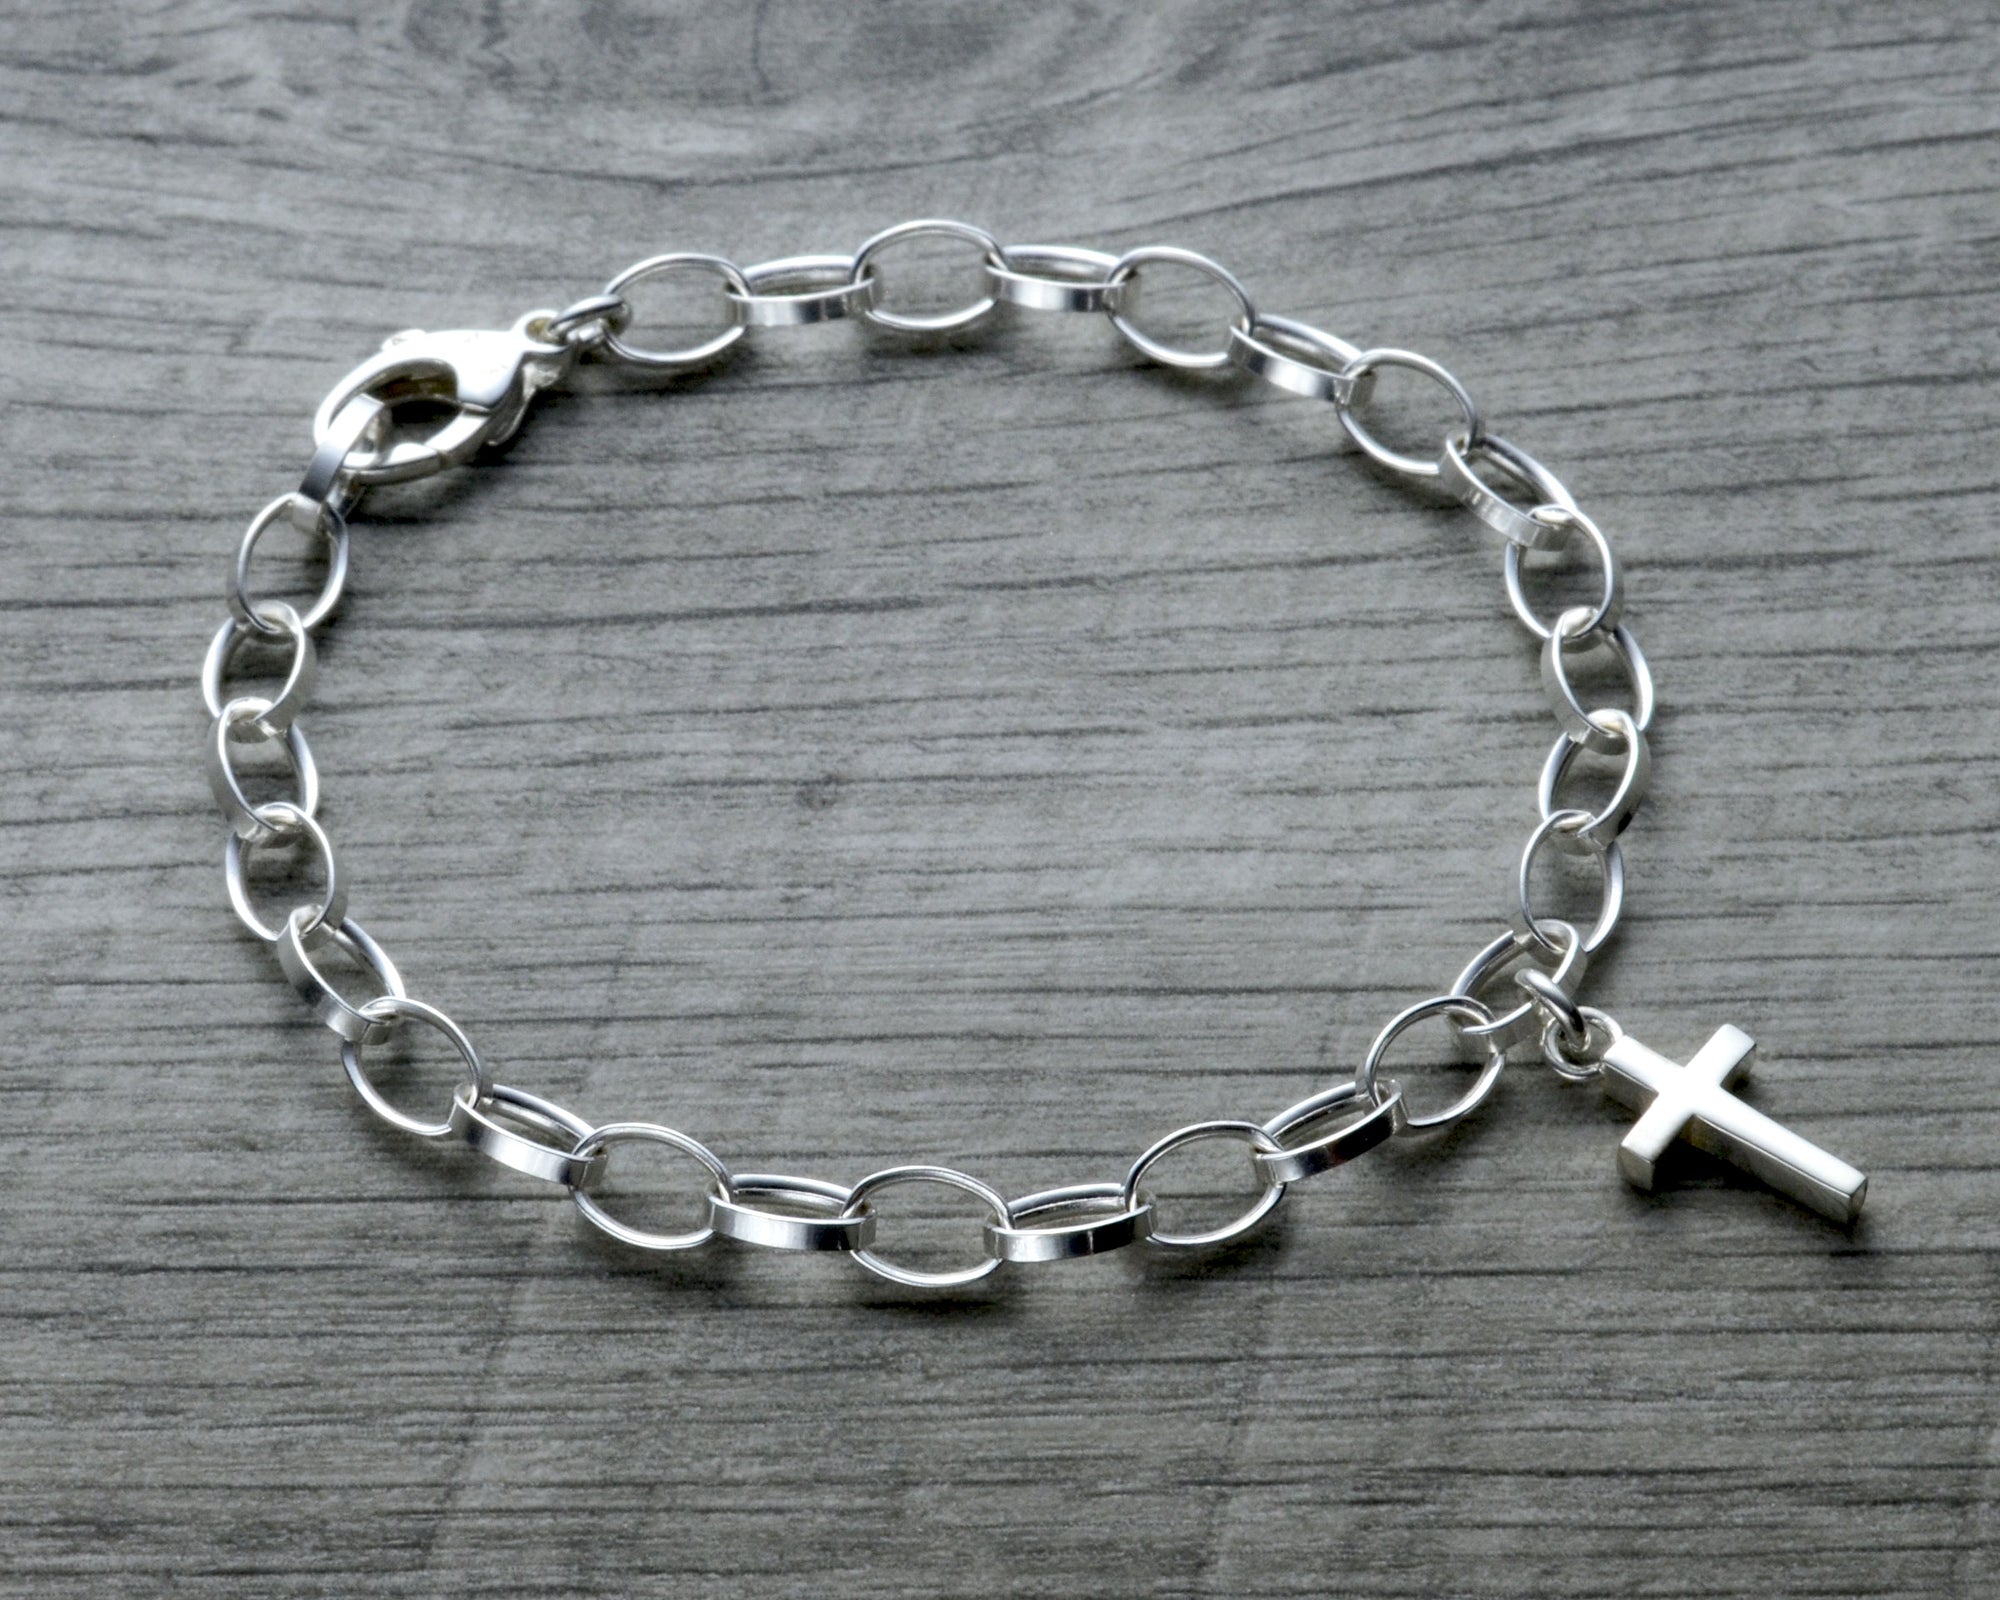 Cross charm bracelet in sterling silver with clasp